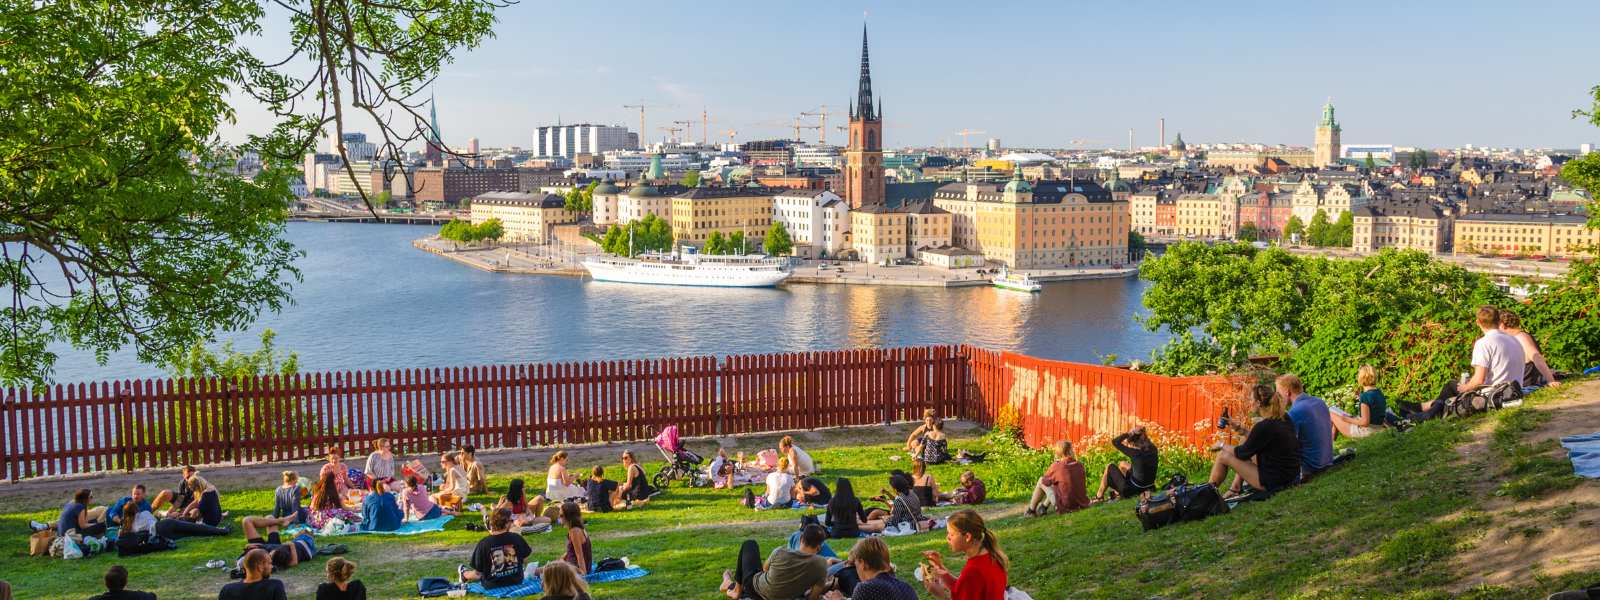 Students picnic on a lawn in Stockholm